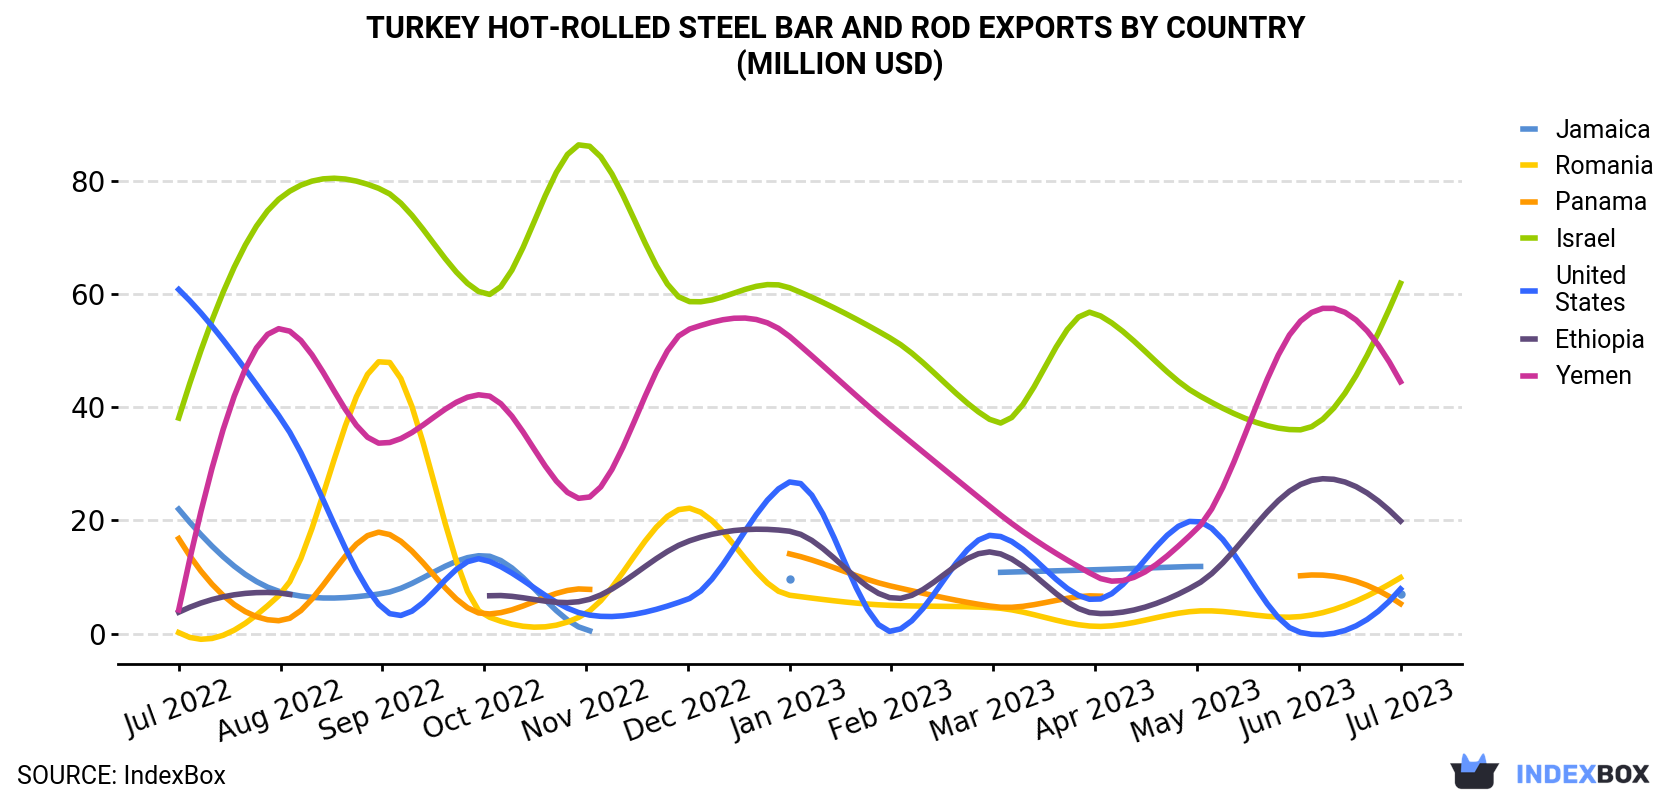 Turkey Hot-Rolled Steel Bar and Rod Exports By Country (Million USD)